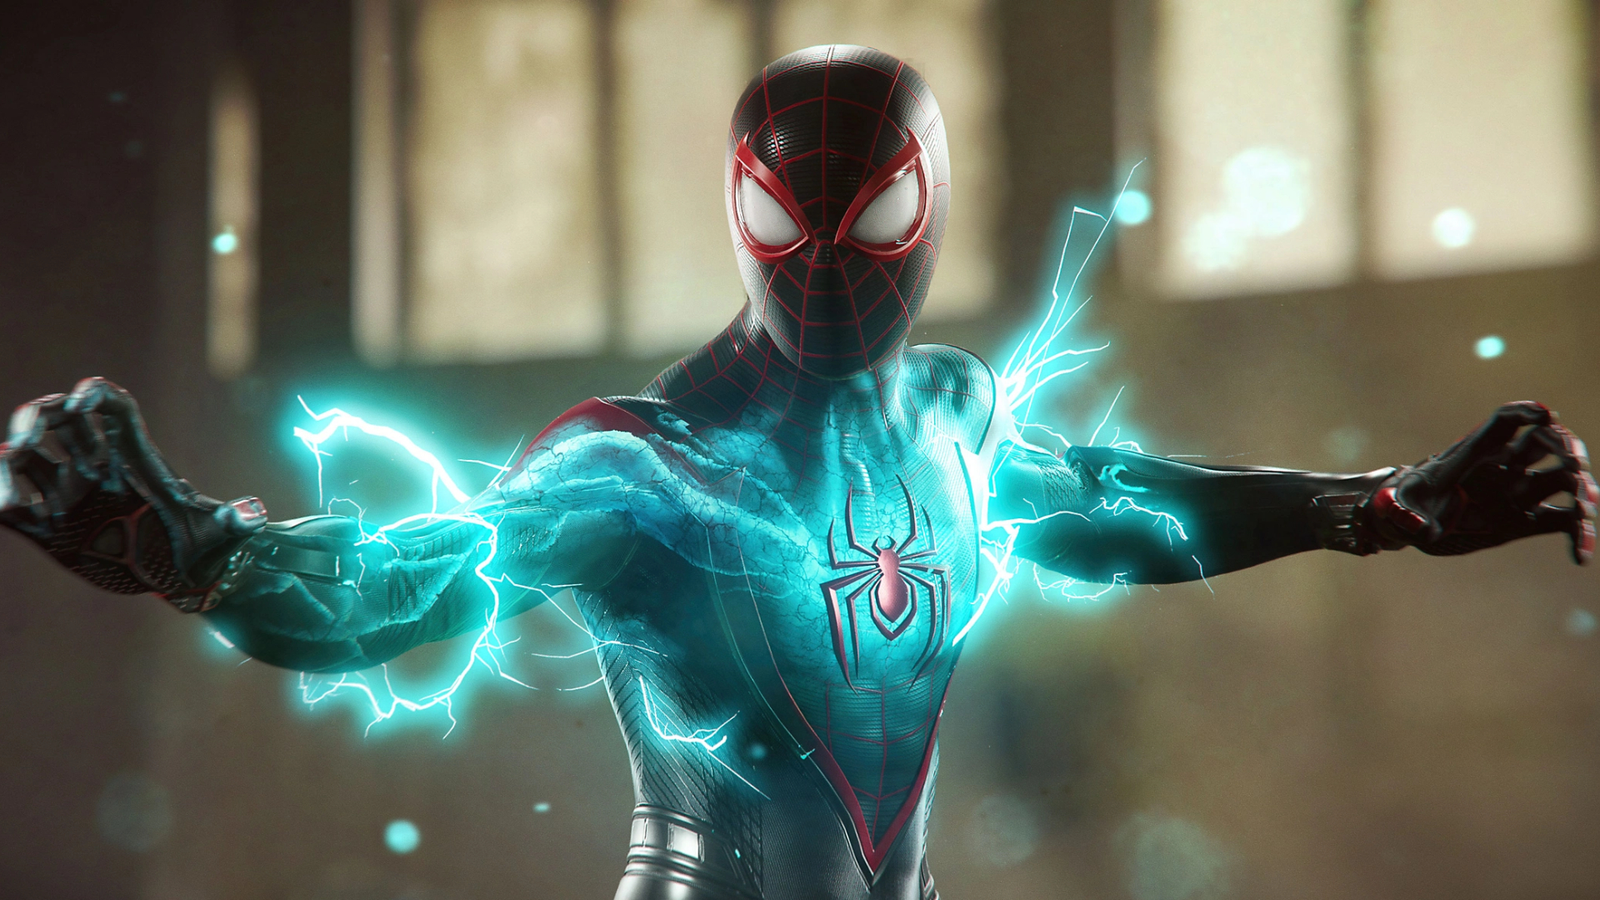 Where to buy Marvel's Spider-Man 2